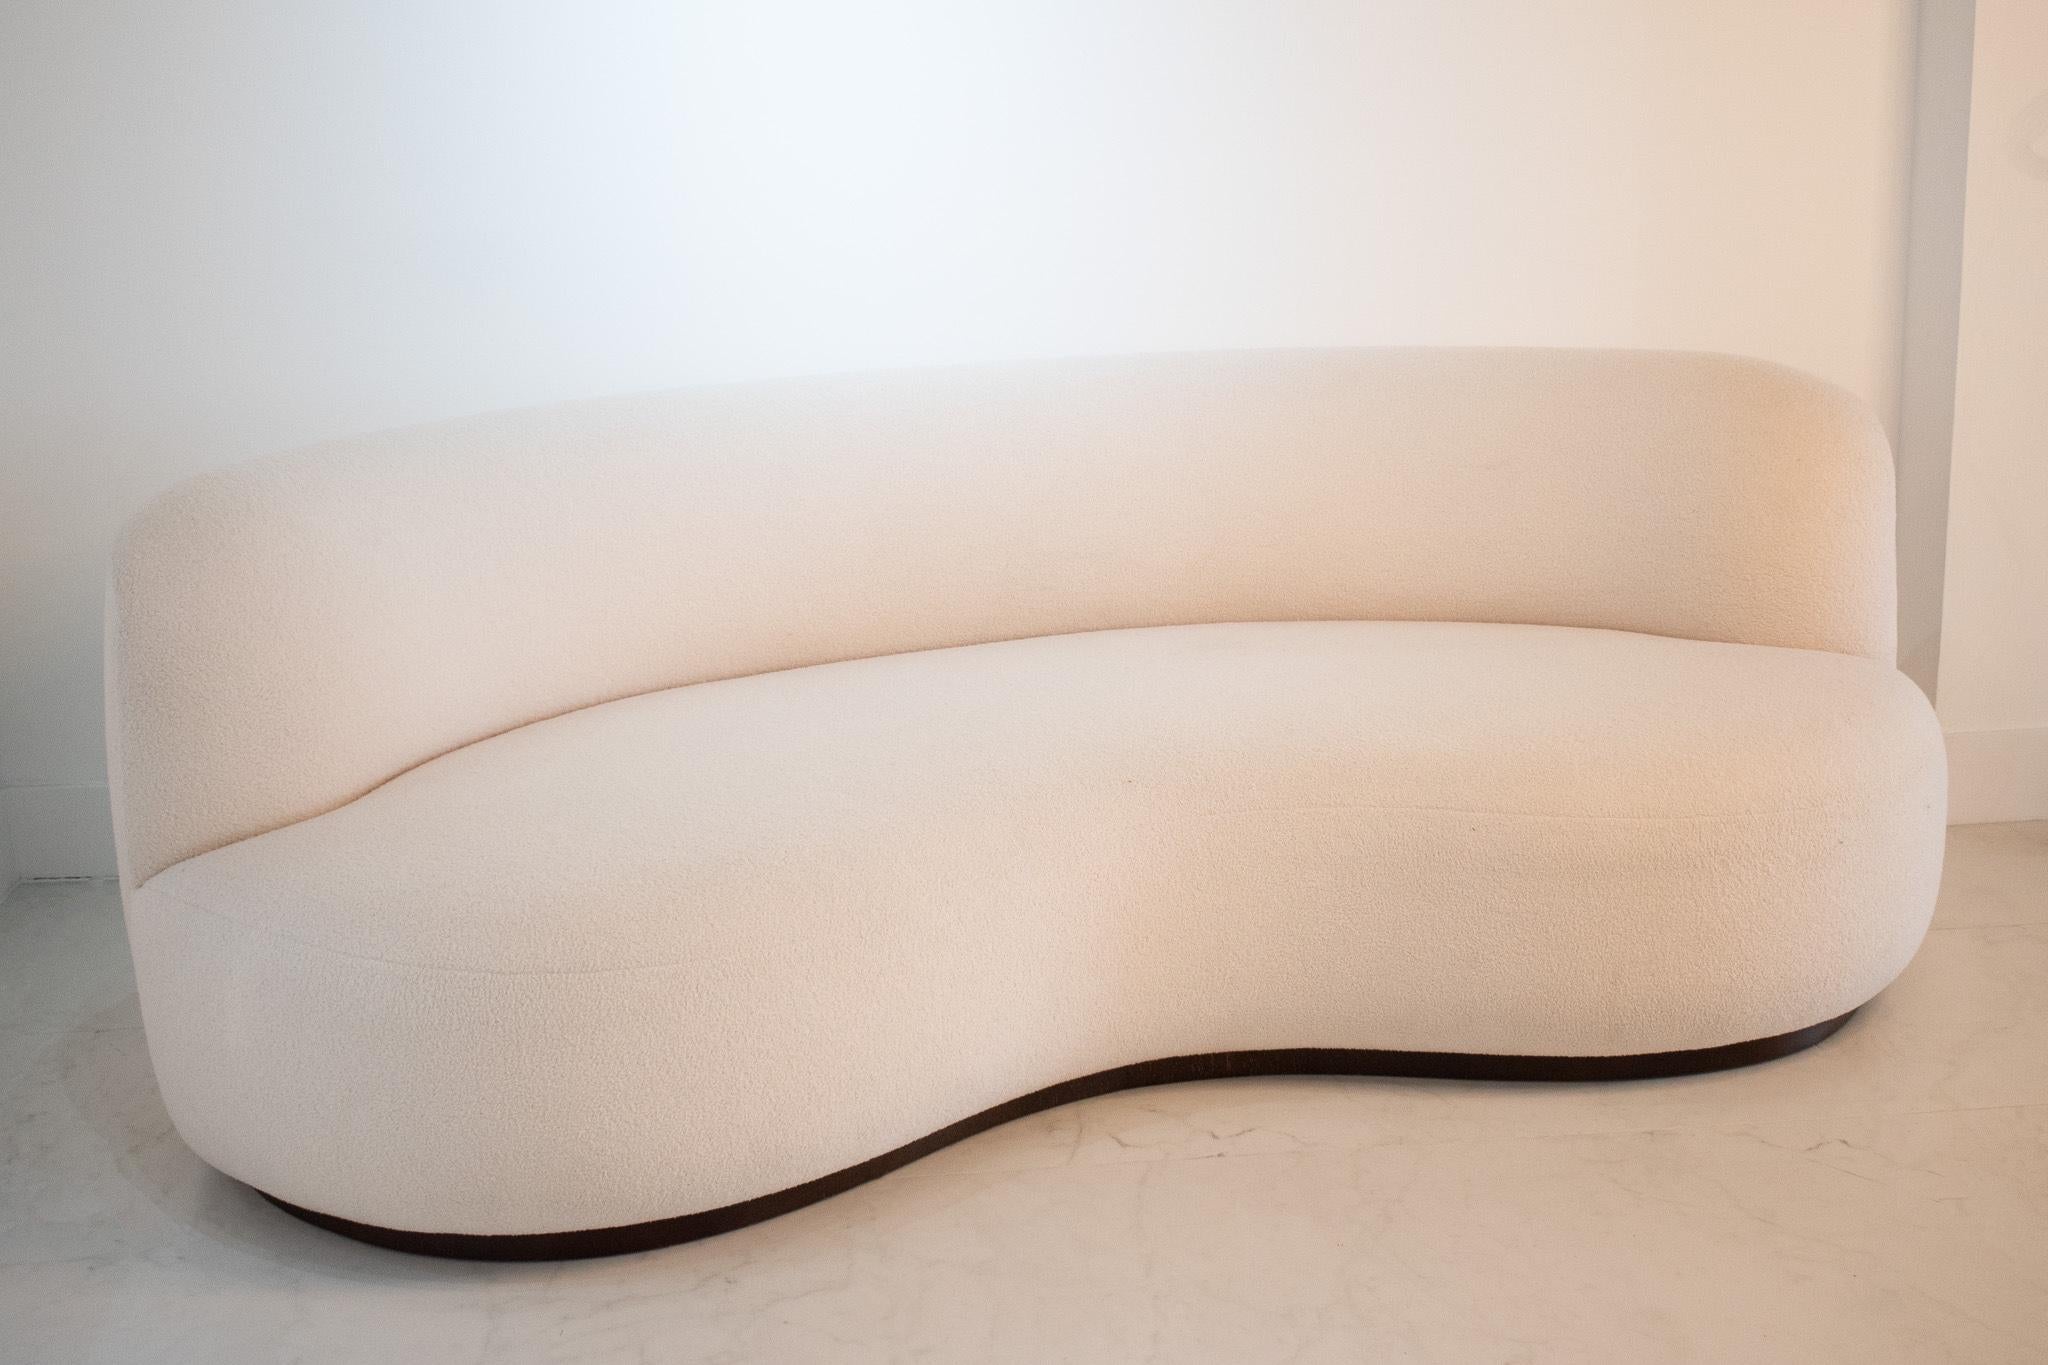 The 'Cloud' sofa is handmade in the UK with a dowelled ply frame. This makes it highly customisable, both in size and fabric. any length is possible and we have a range of fabrics to choose from.

A popular piece in our showroom, this curved sofa in